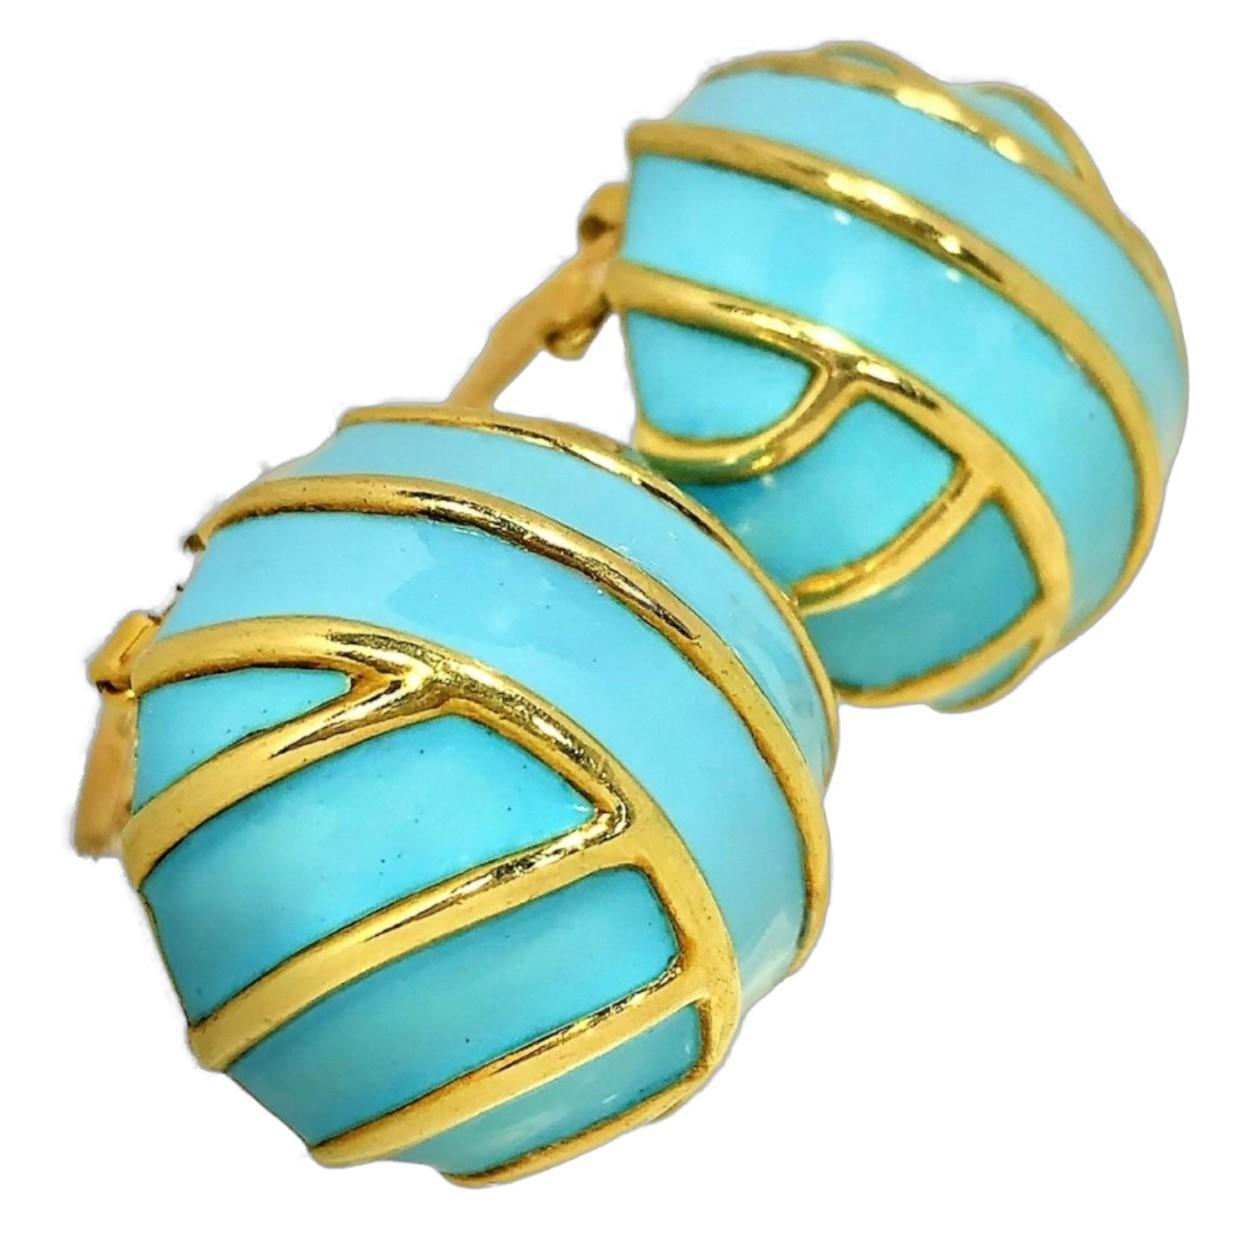 Women's Tiffany & Co. 18k Yellow Gold Dome Earrings with Robins Egg Blue Enamel For Sale